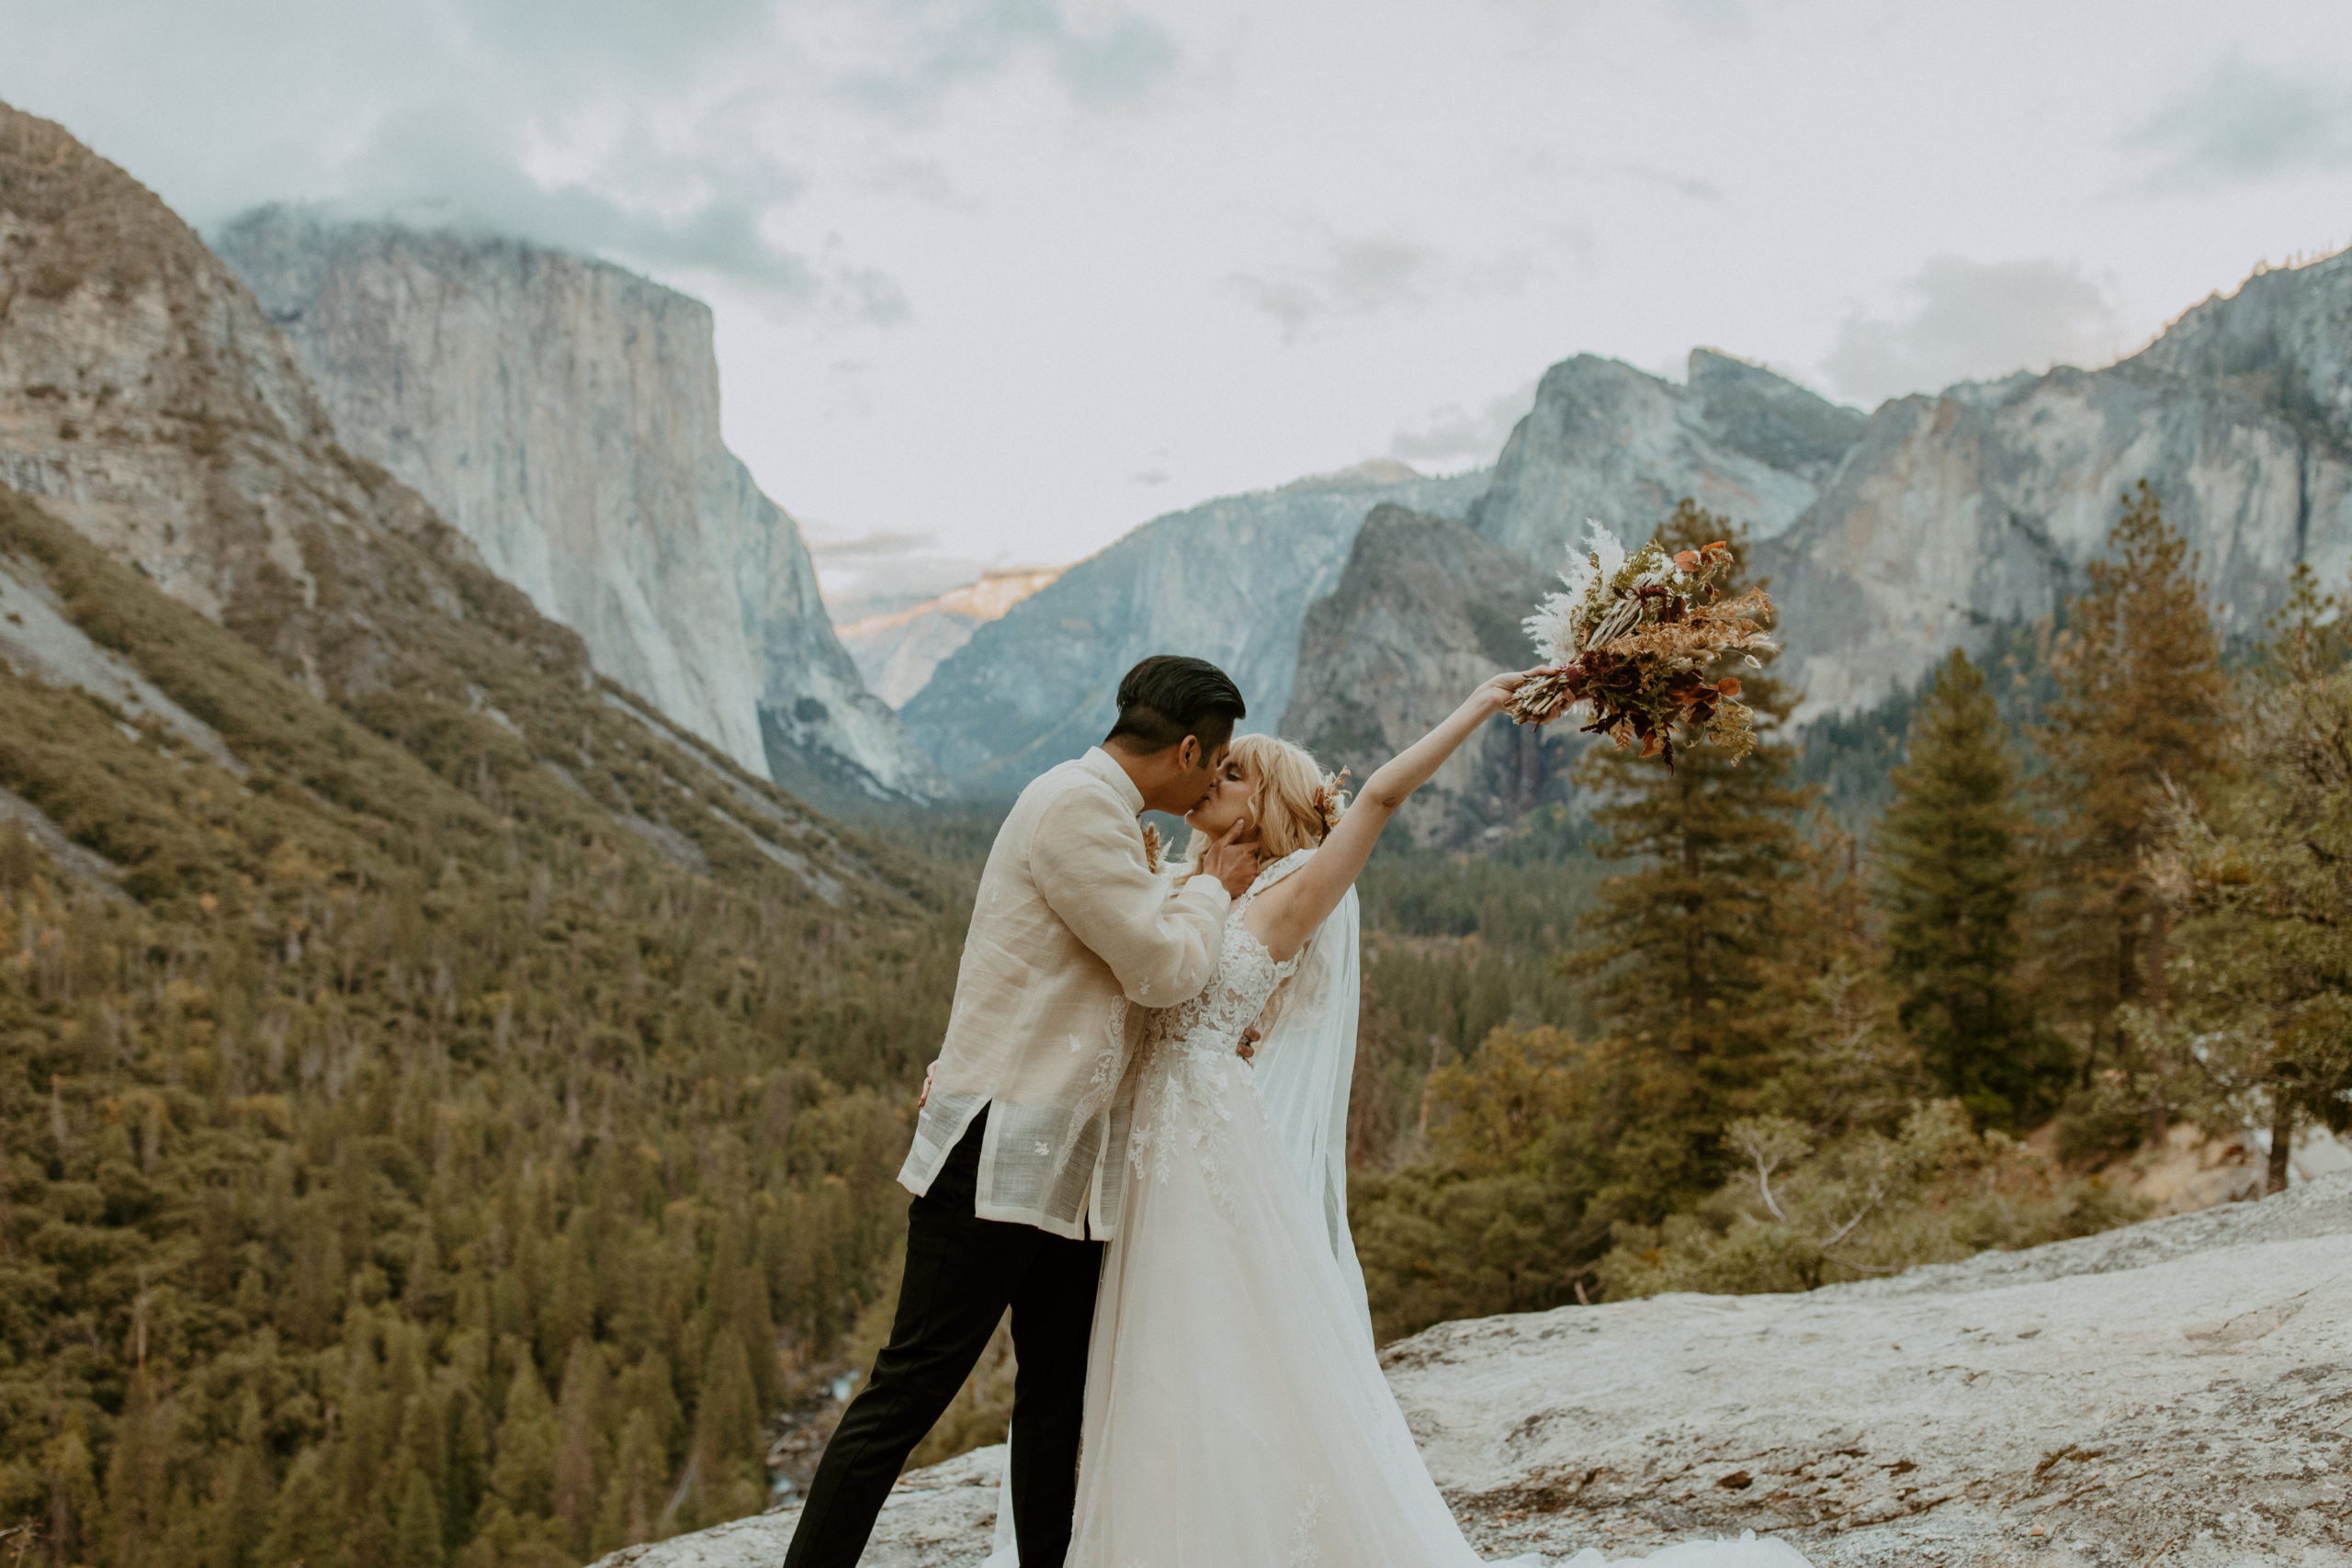 the bride raising her bouquet in the air at Tunnel View in Yosemite